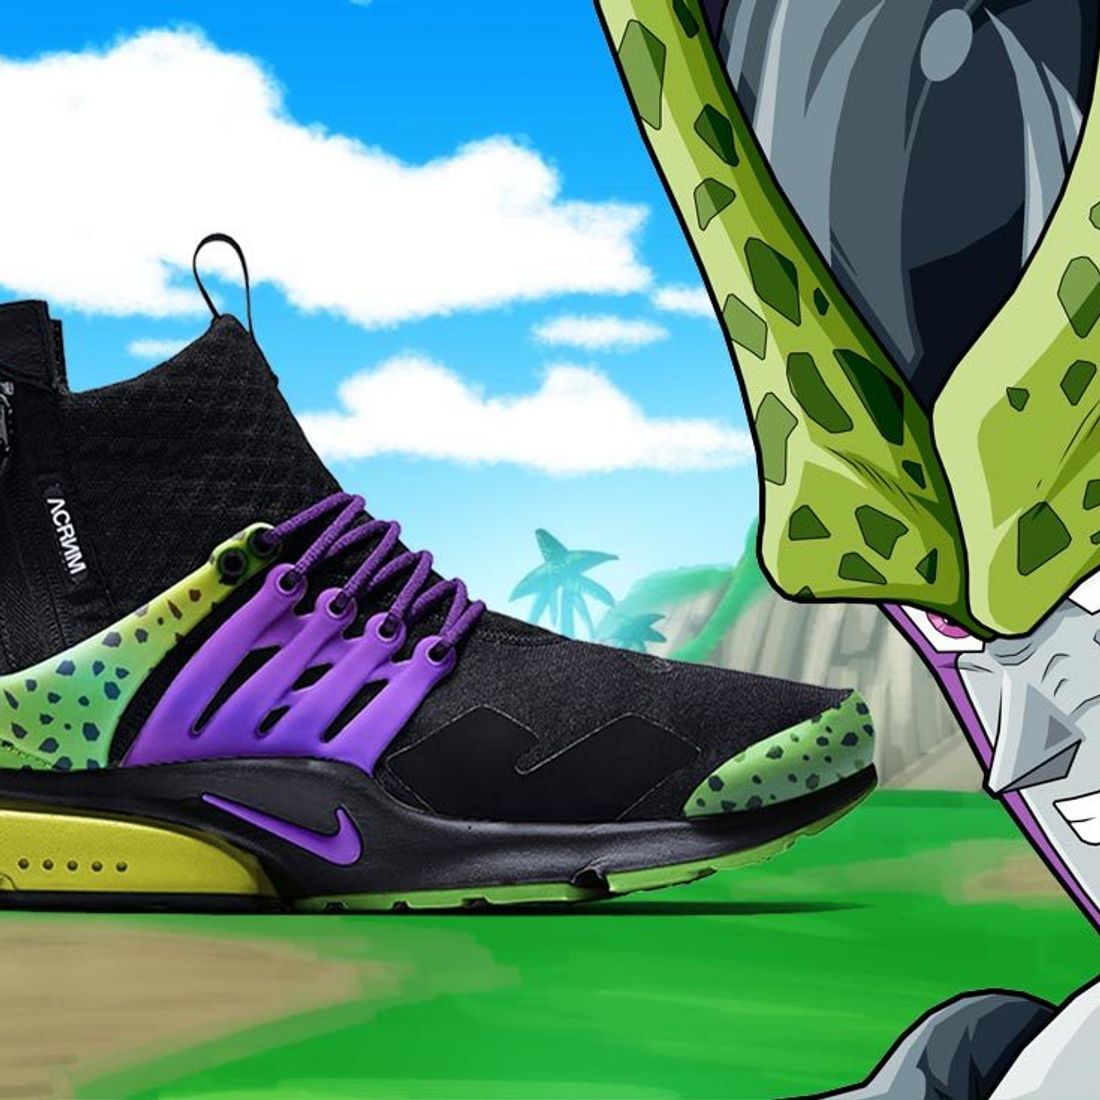 Deter basketbal stout Check Out These Stunning Dragon Ball Z x Nike Concepts - Sneaker Freaker